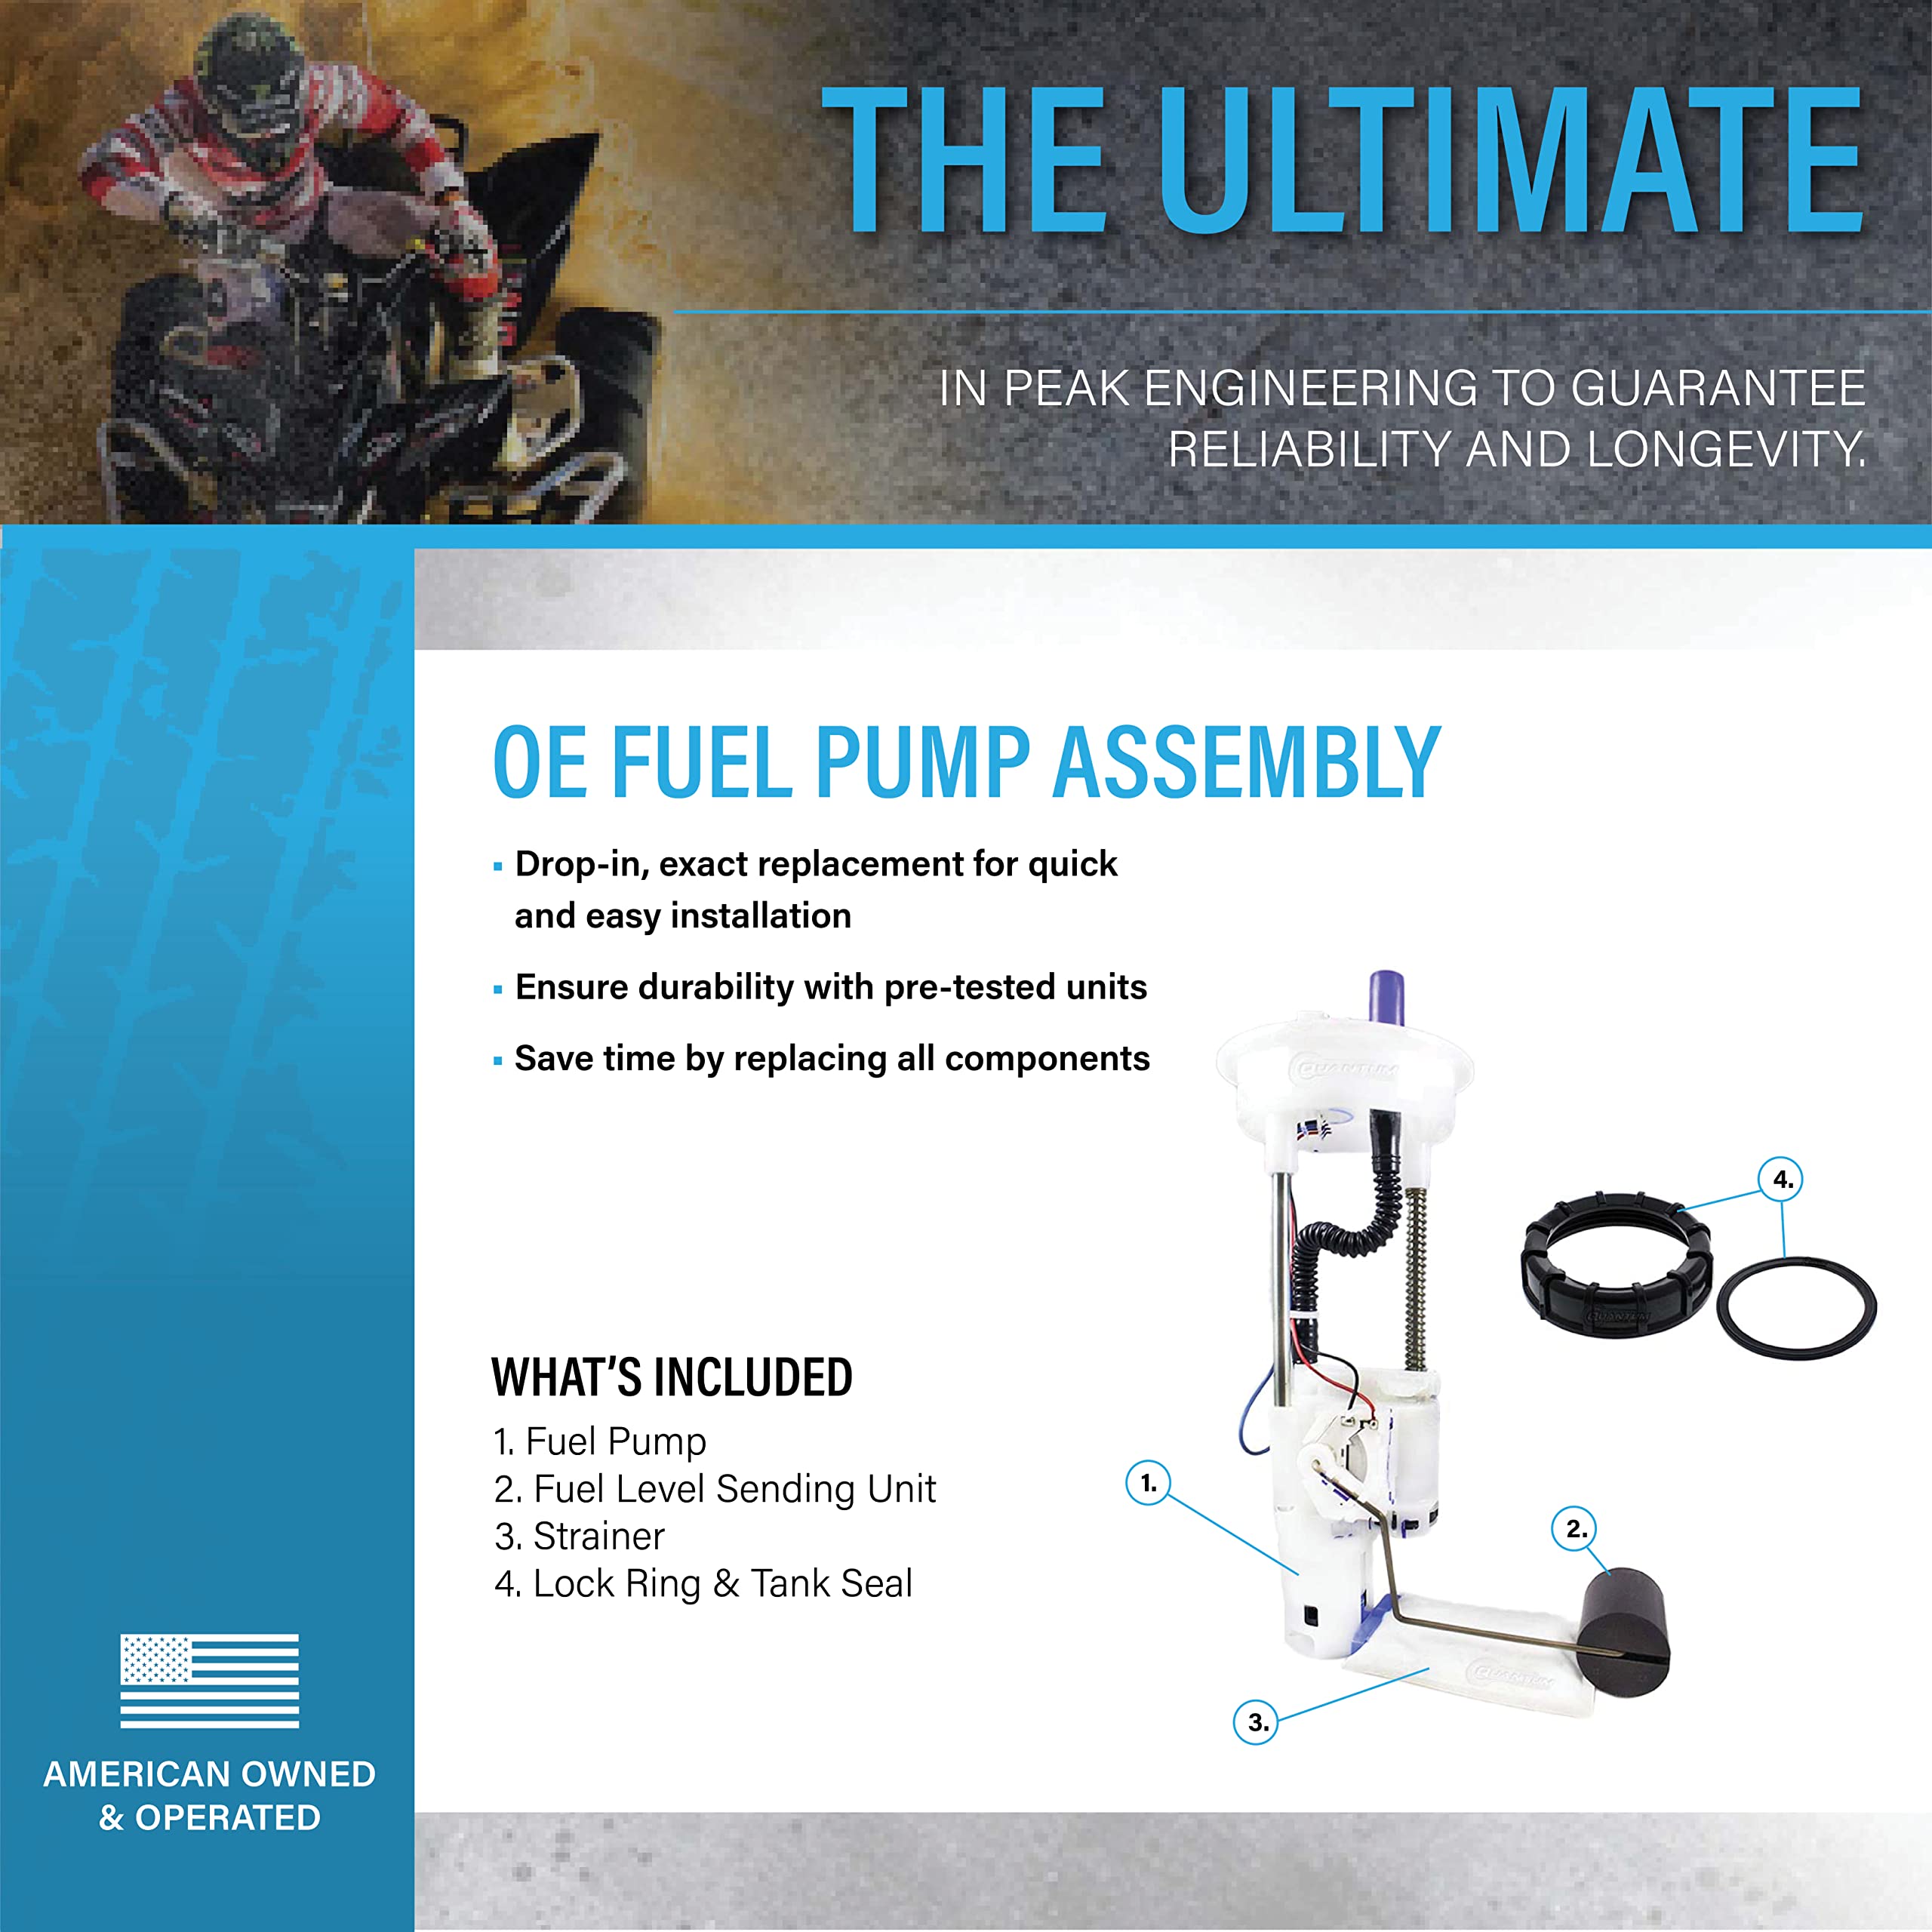 QFS OEM In-Tank Fuel Pump Assembly Replacement for Polaris Ace 325 570 900 / RZR 4 900 64 XP 4 1000 / Sportsman Ace XP 1000 / Scrambler XP 1000 Full Assembly, 2014-2022, OEM 2208323 2208591